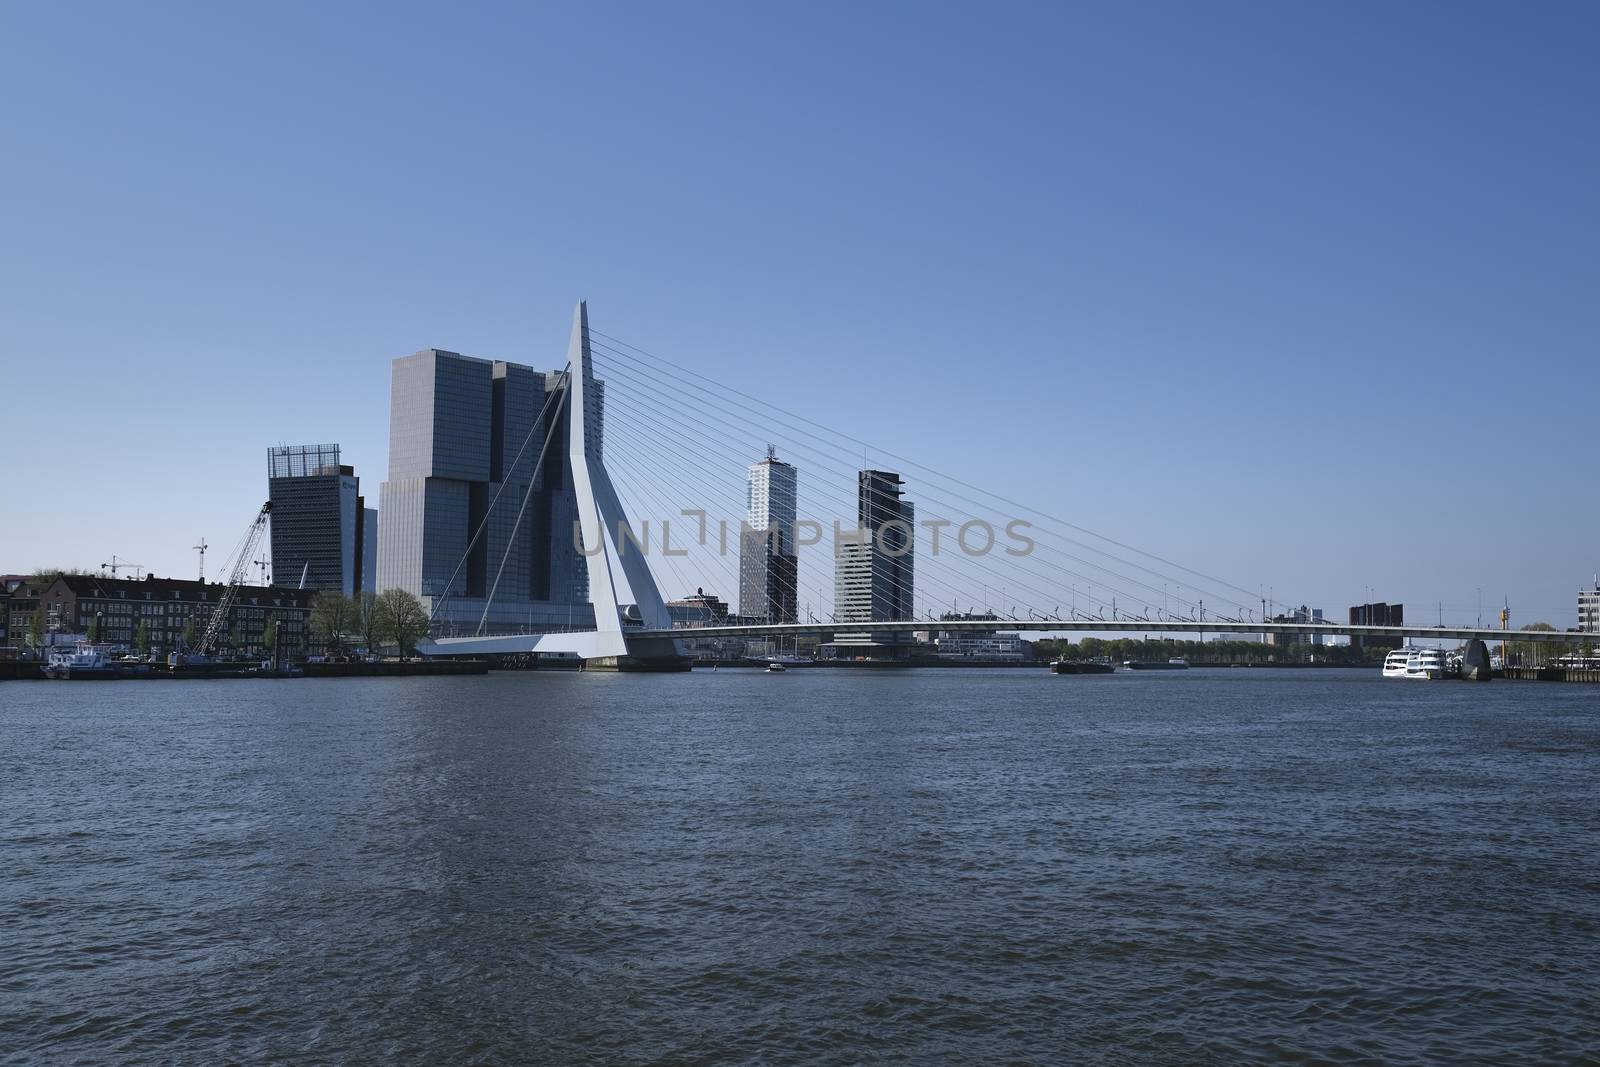 panoramic view of the Erasmus bridge in the city and buildings o by Tjeerdkruse